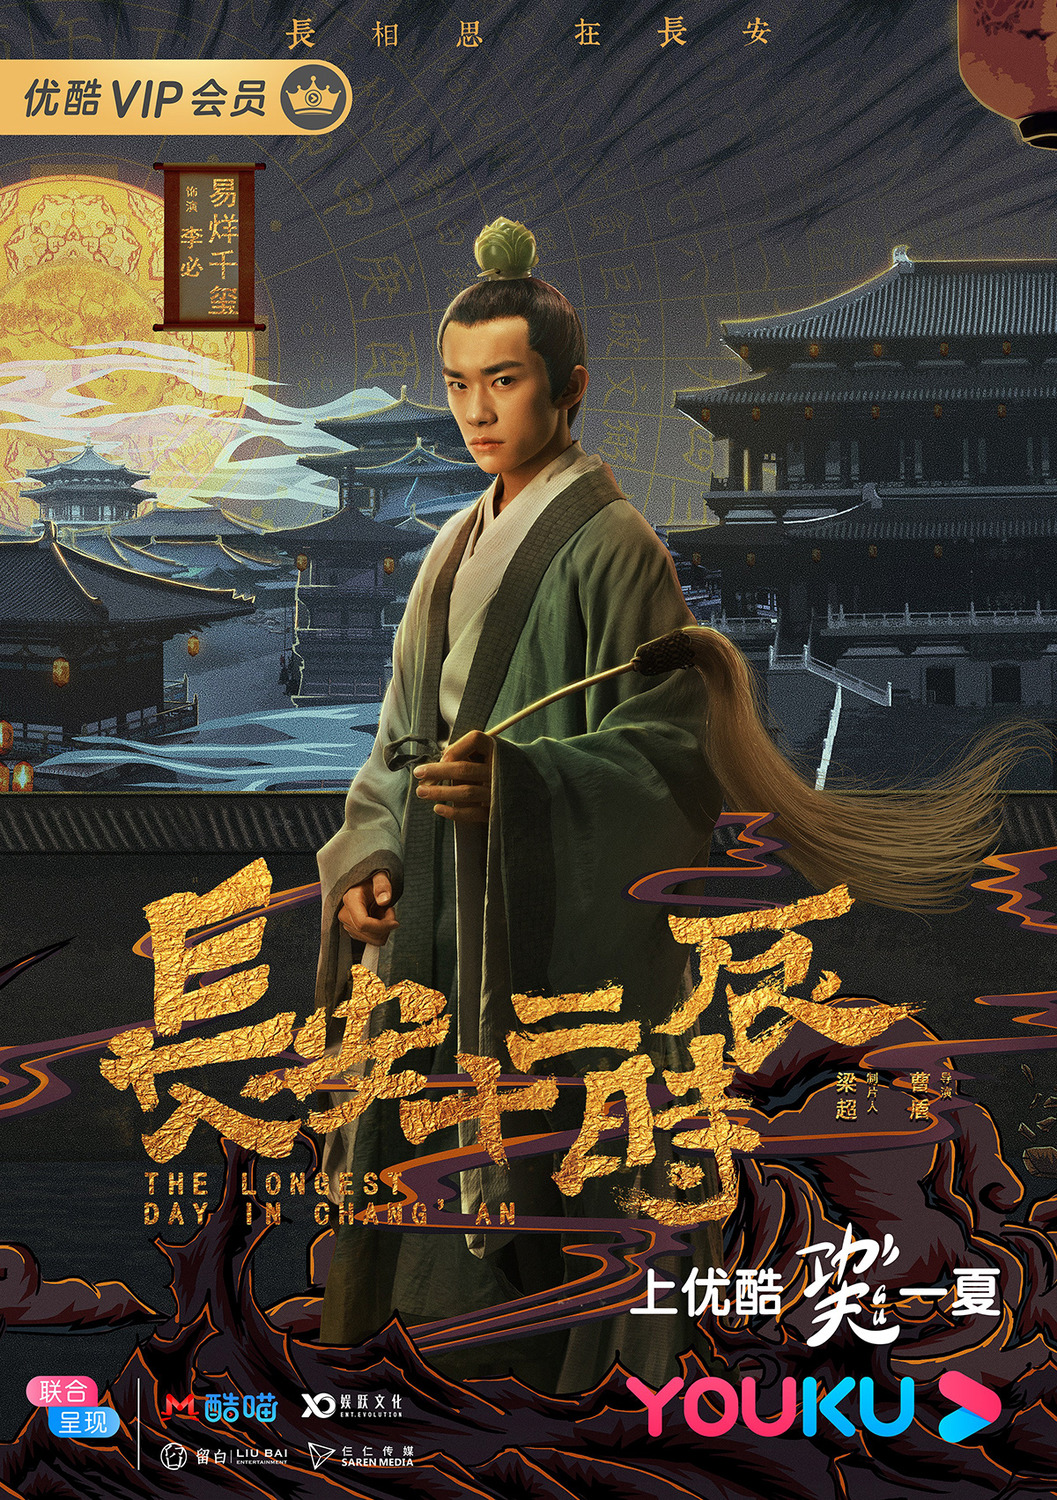 Extra Large TV Poster Image for Chang'an shi er shi chen (#10 of 18)